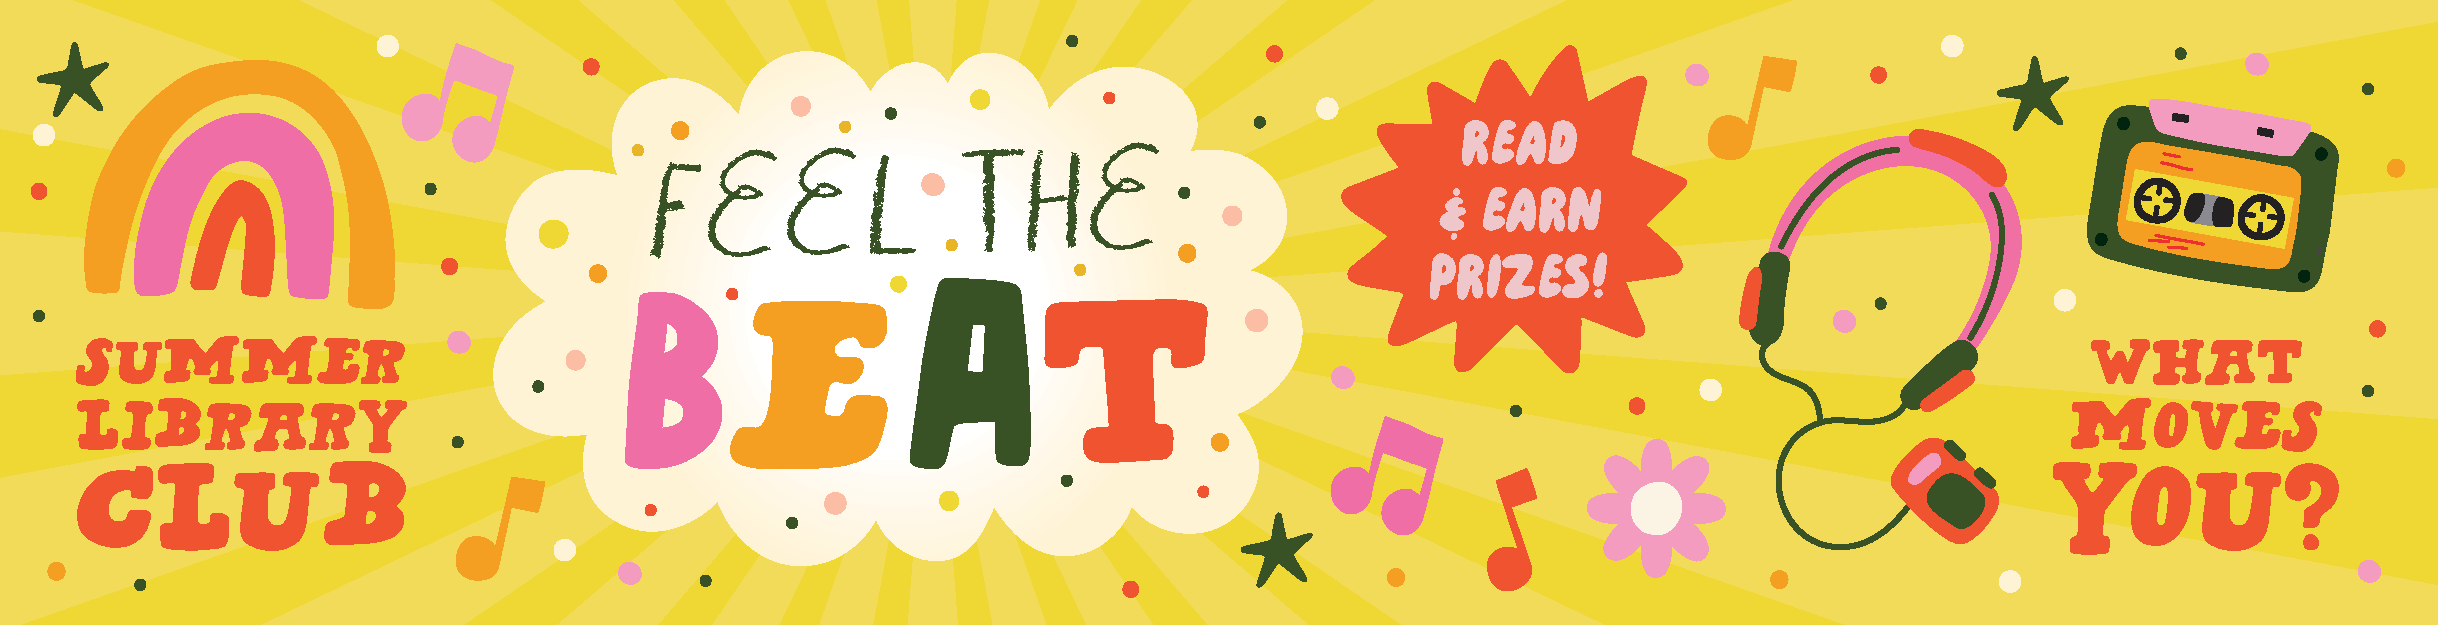 Summer Library Club - Feel the Beat - Read & Earn Prizes - What moves you?